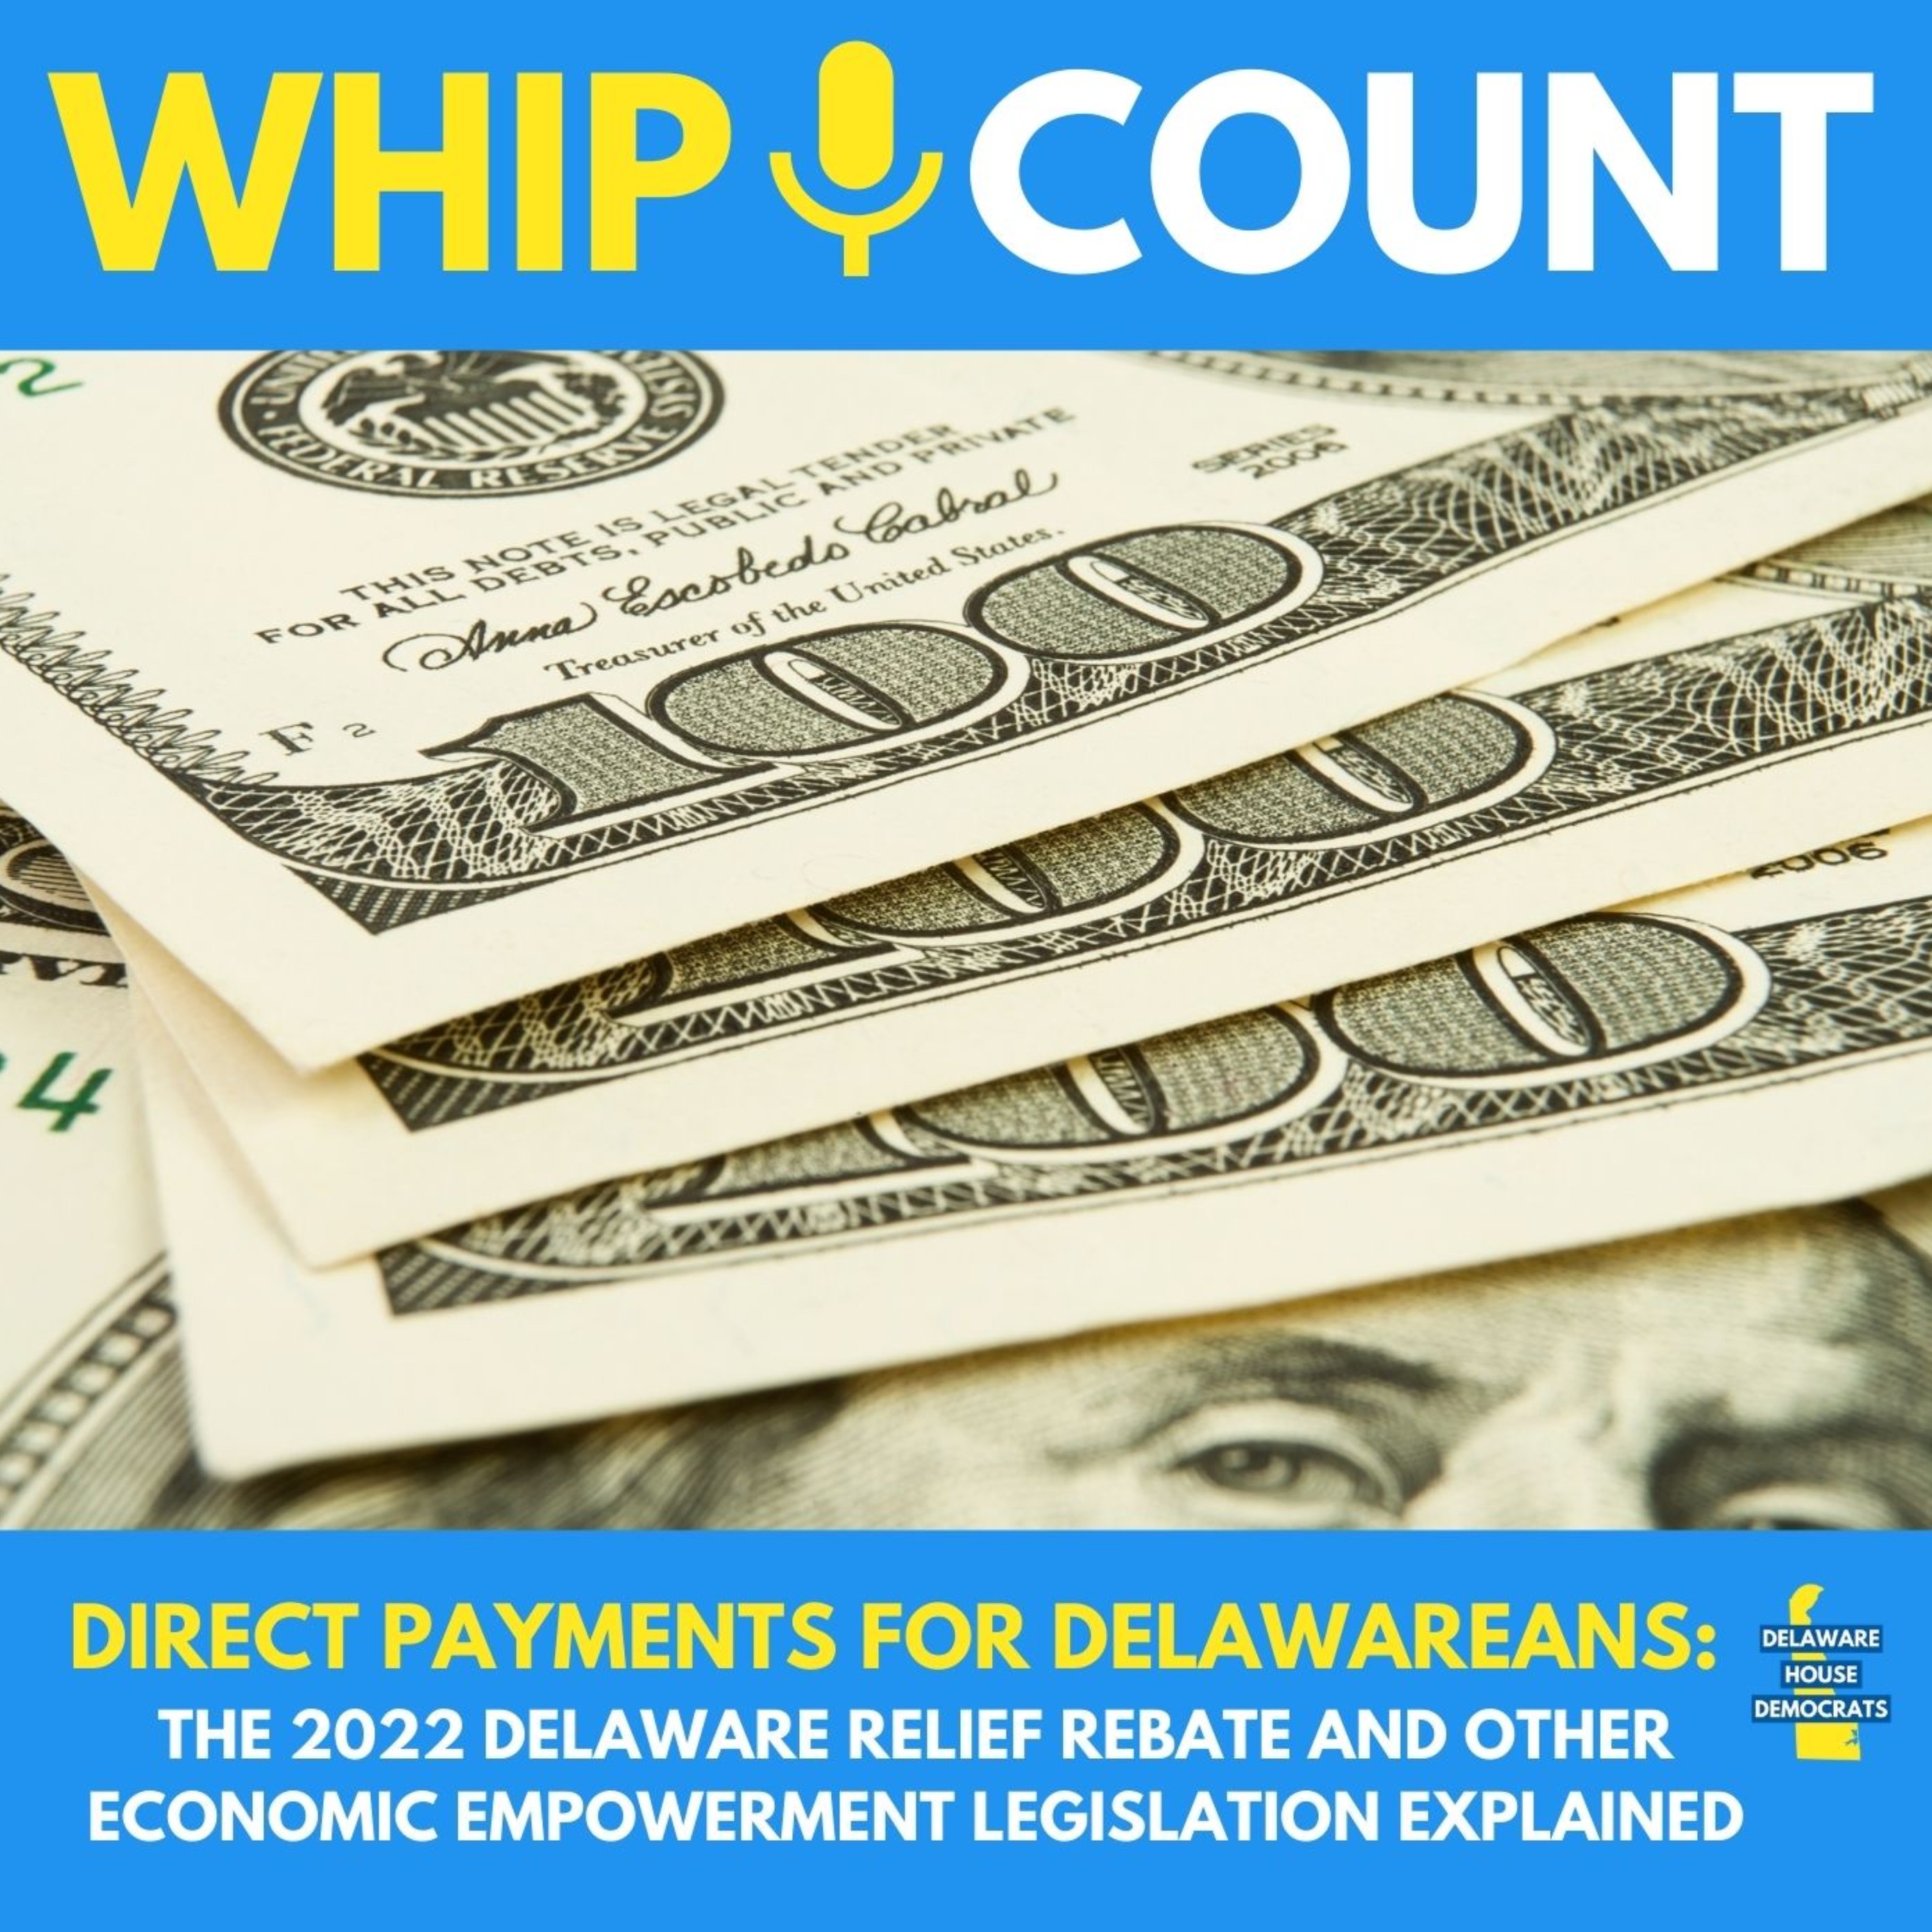 direct-payments-for-delawareans-the-2022-delaware-relief-rebate-and